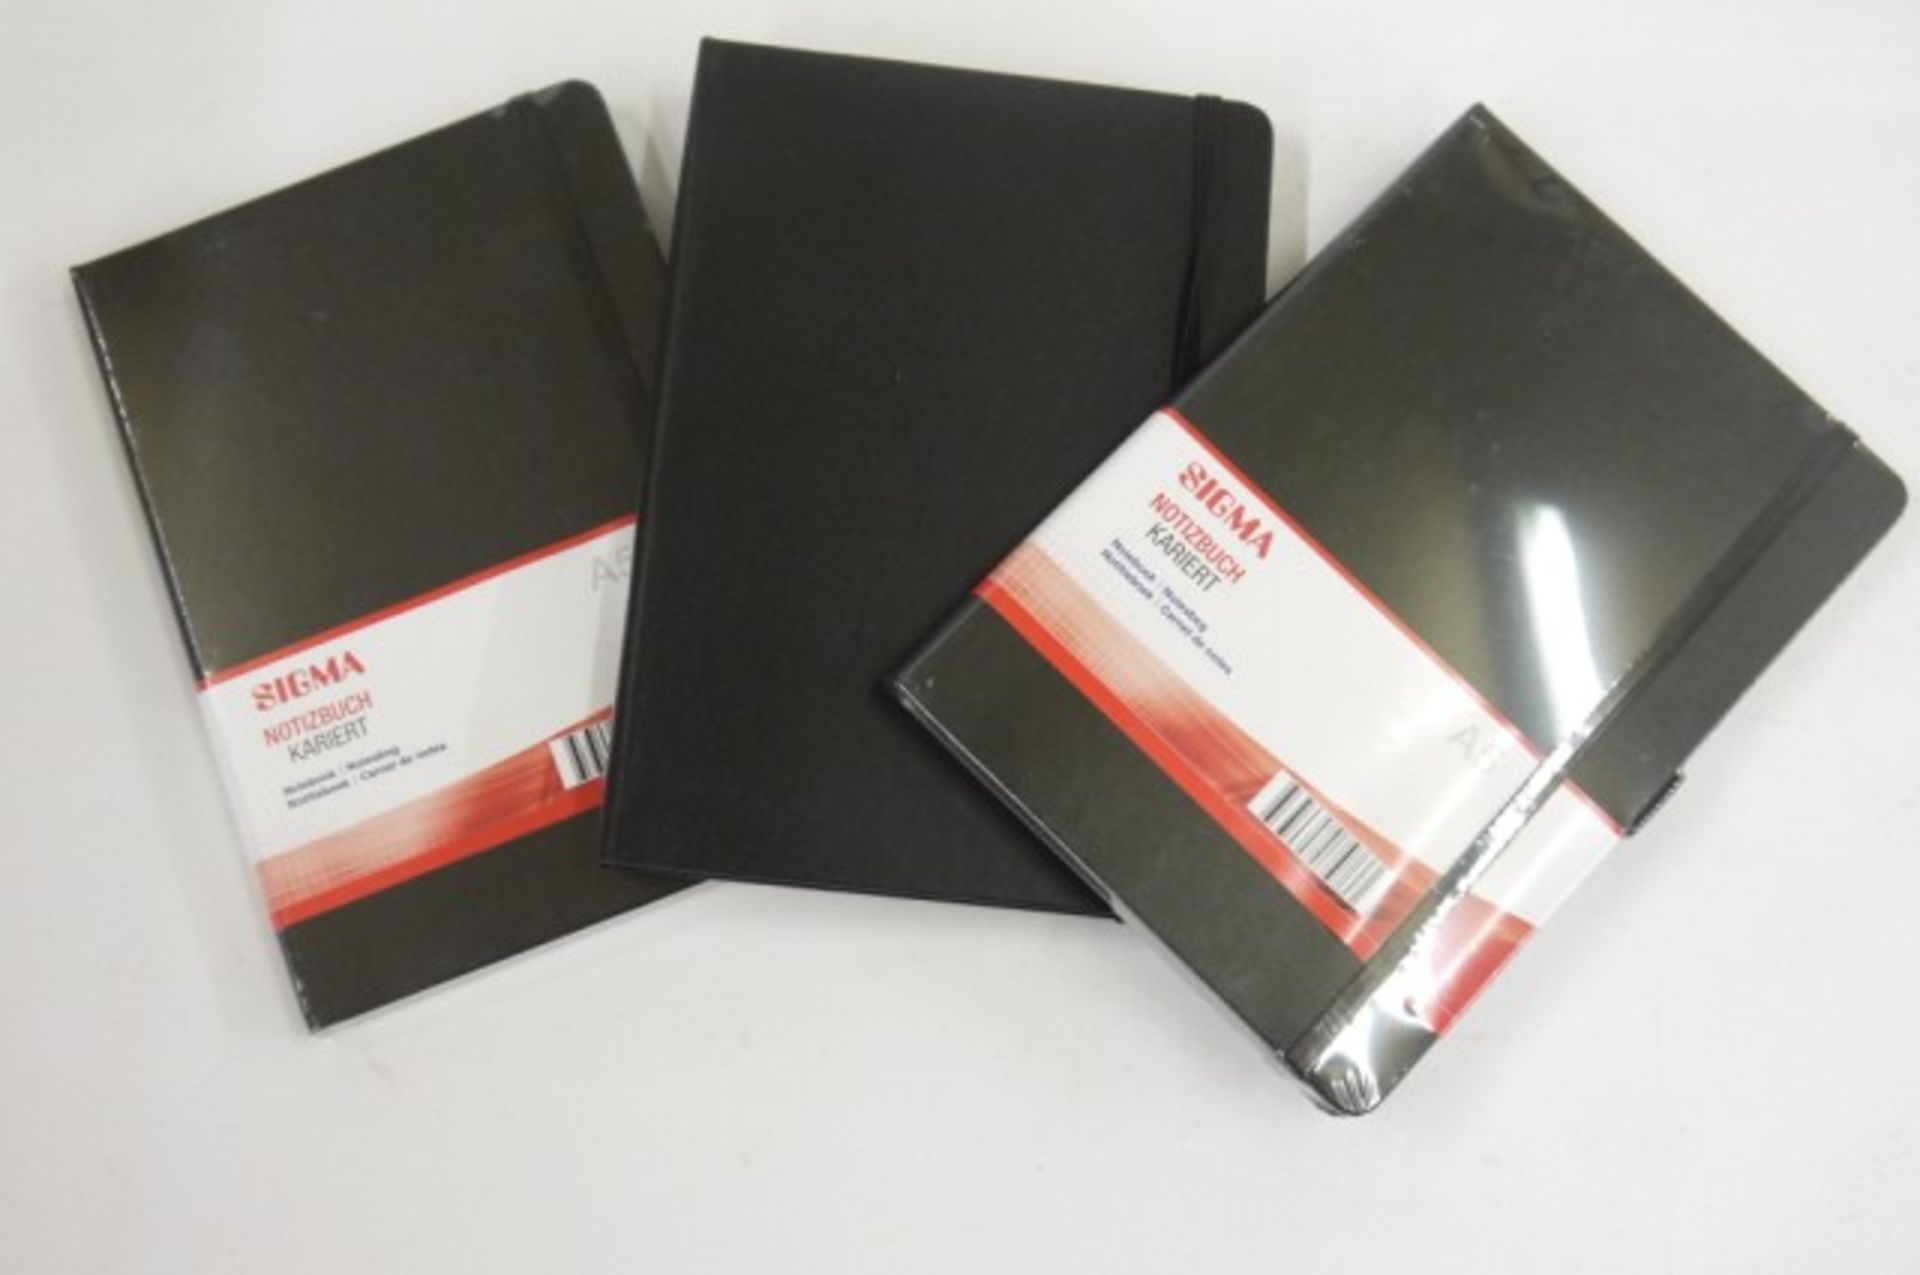 V *TRADE QTY* Brand New Three Sigma A5 Notebooks X 3 YOUR BID PRICE TO BE MULTIPLIED BY THREE